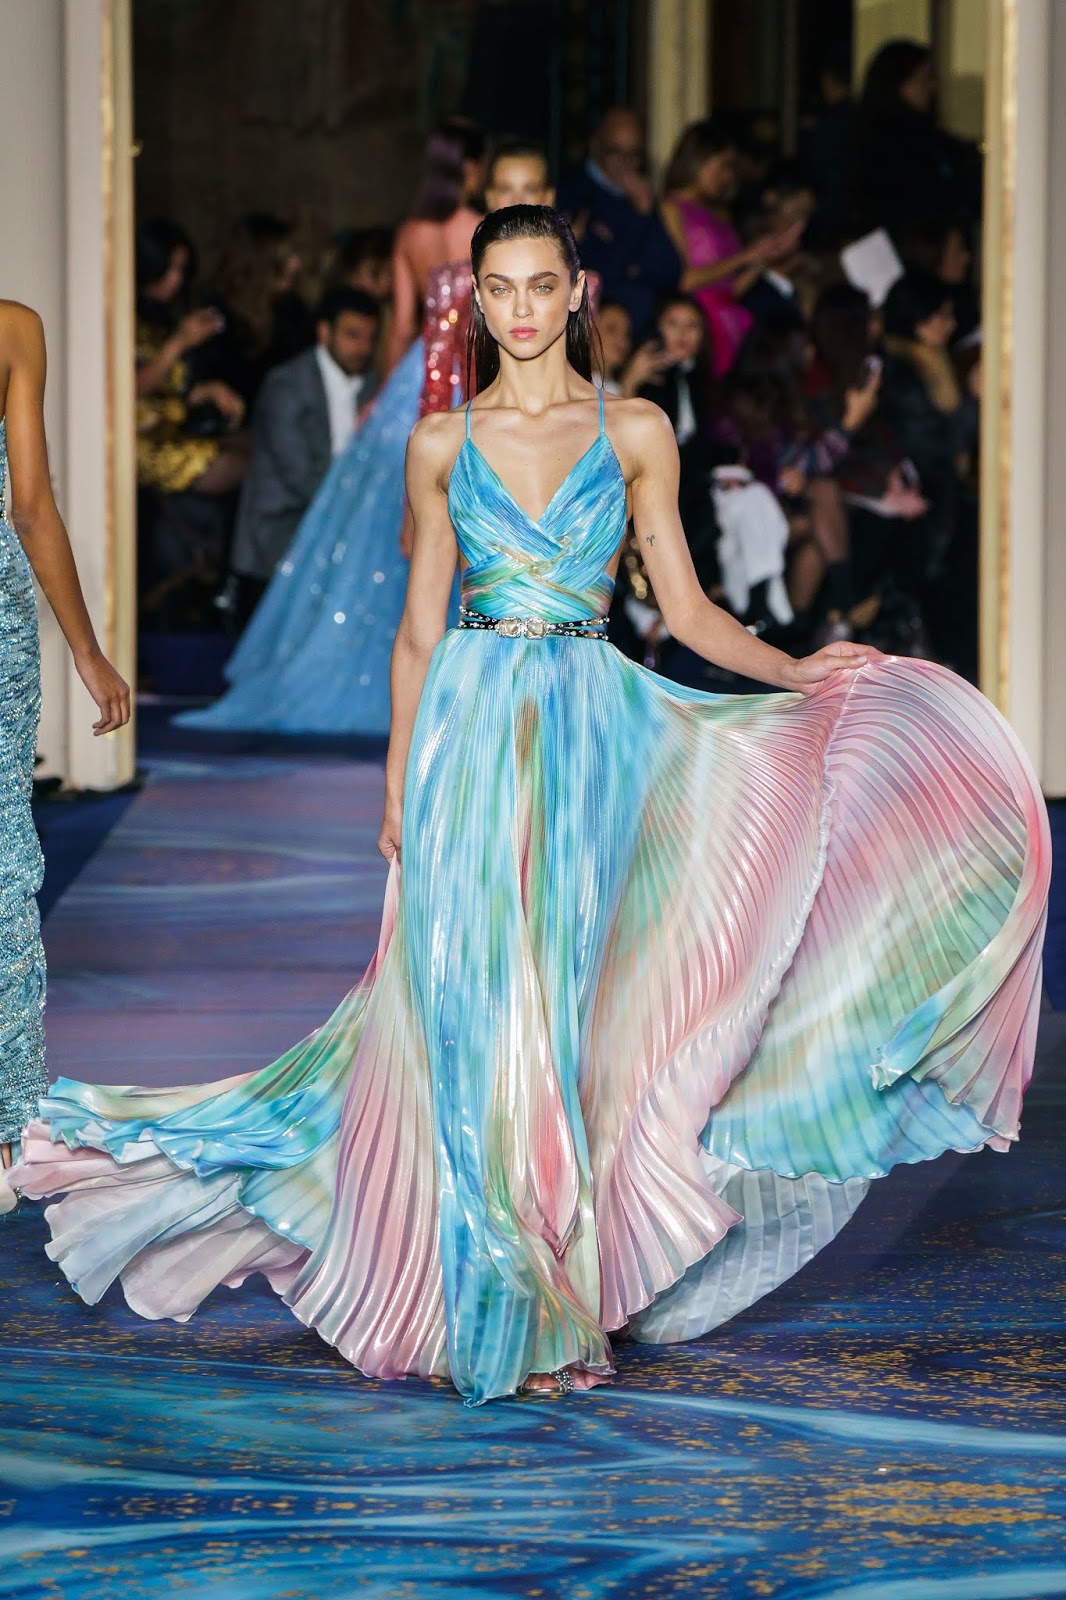 COUTURE GLAMOUR: ZUHAIR MURAD